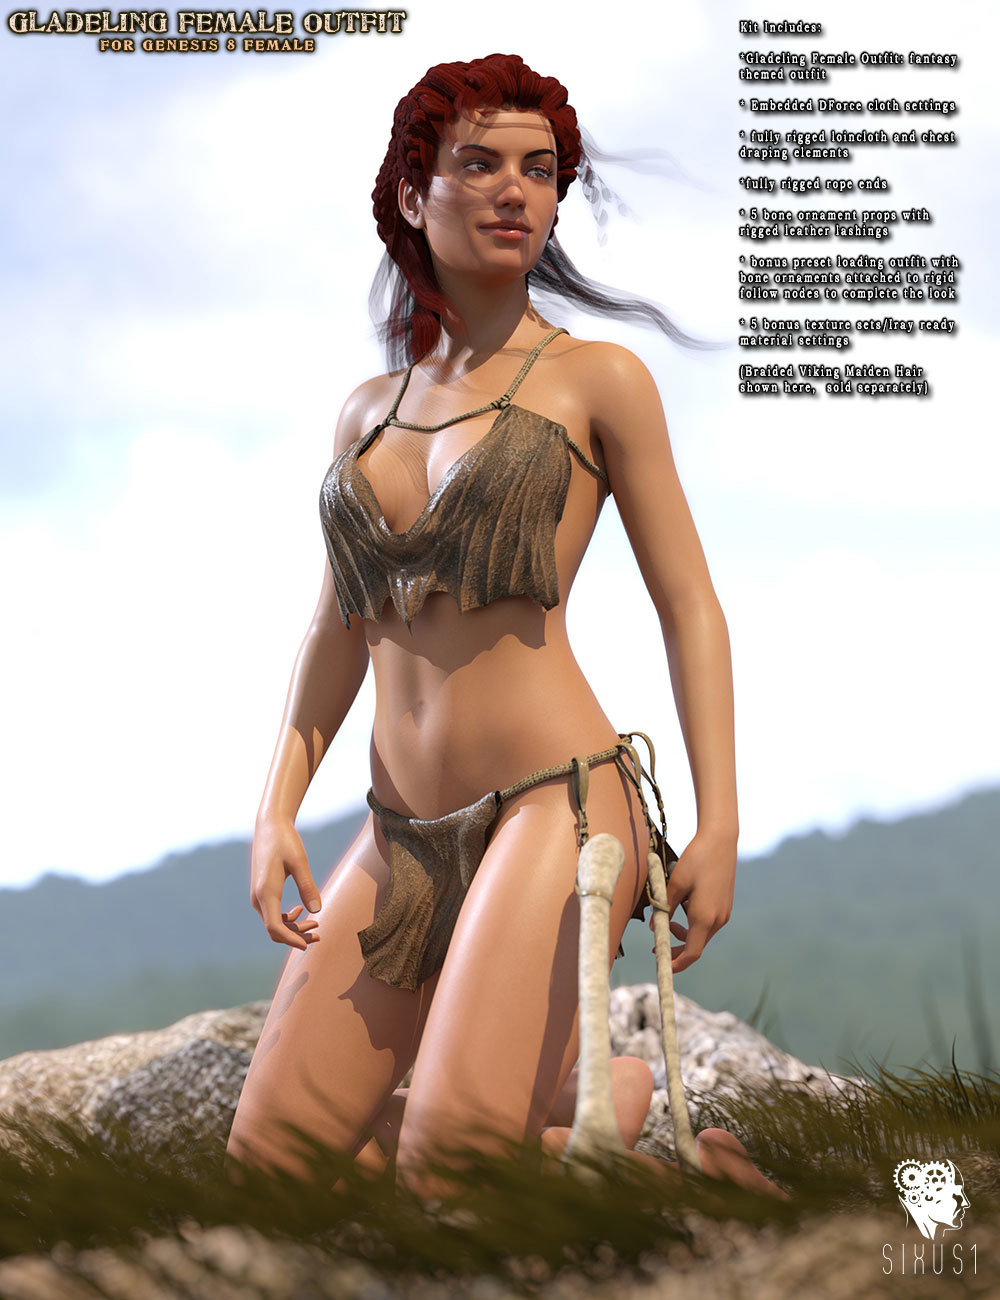 Gladeling Female Outfit for G8F_DAZ3DDL